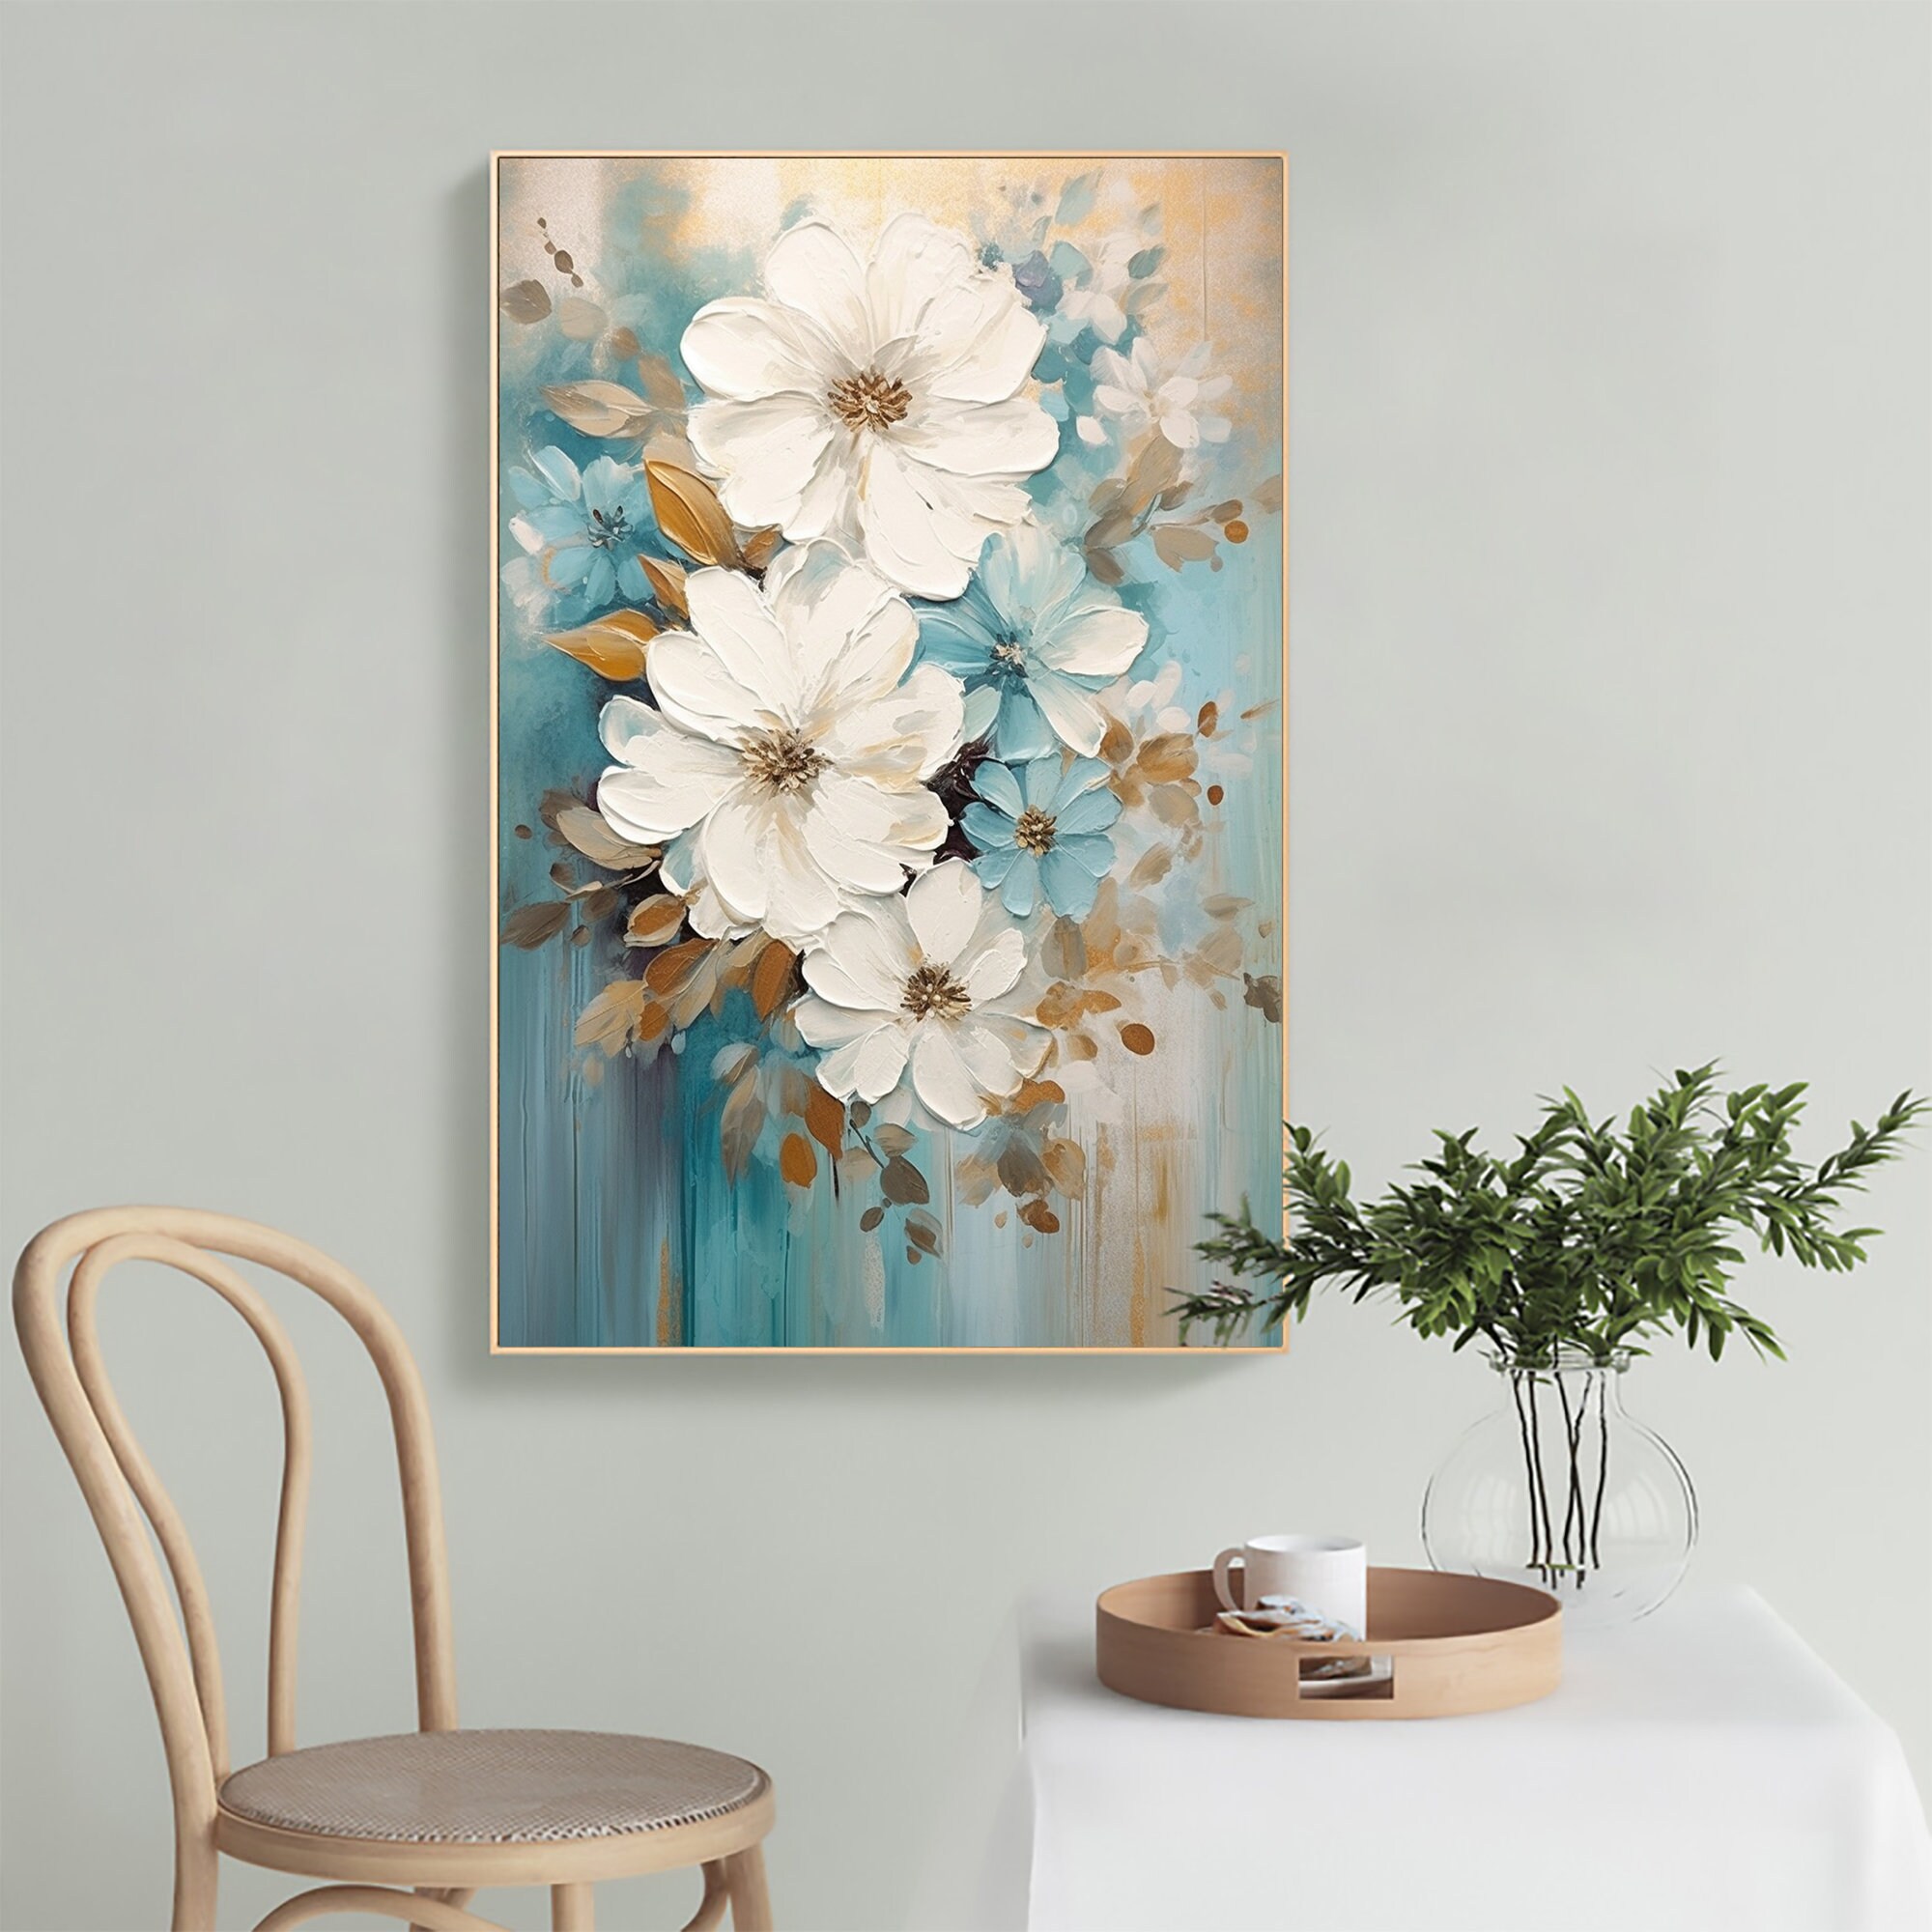 Large Original Flower Oil Painting on Canvas Canvas Wall Art - Etsy Canada